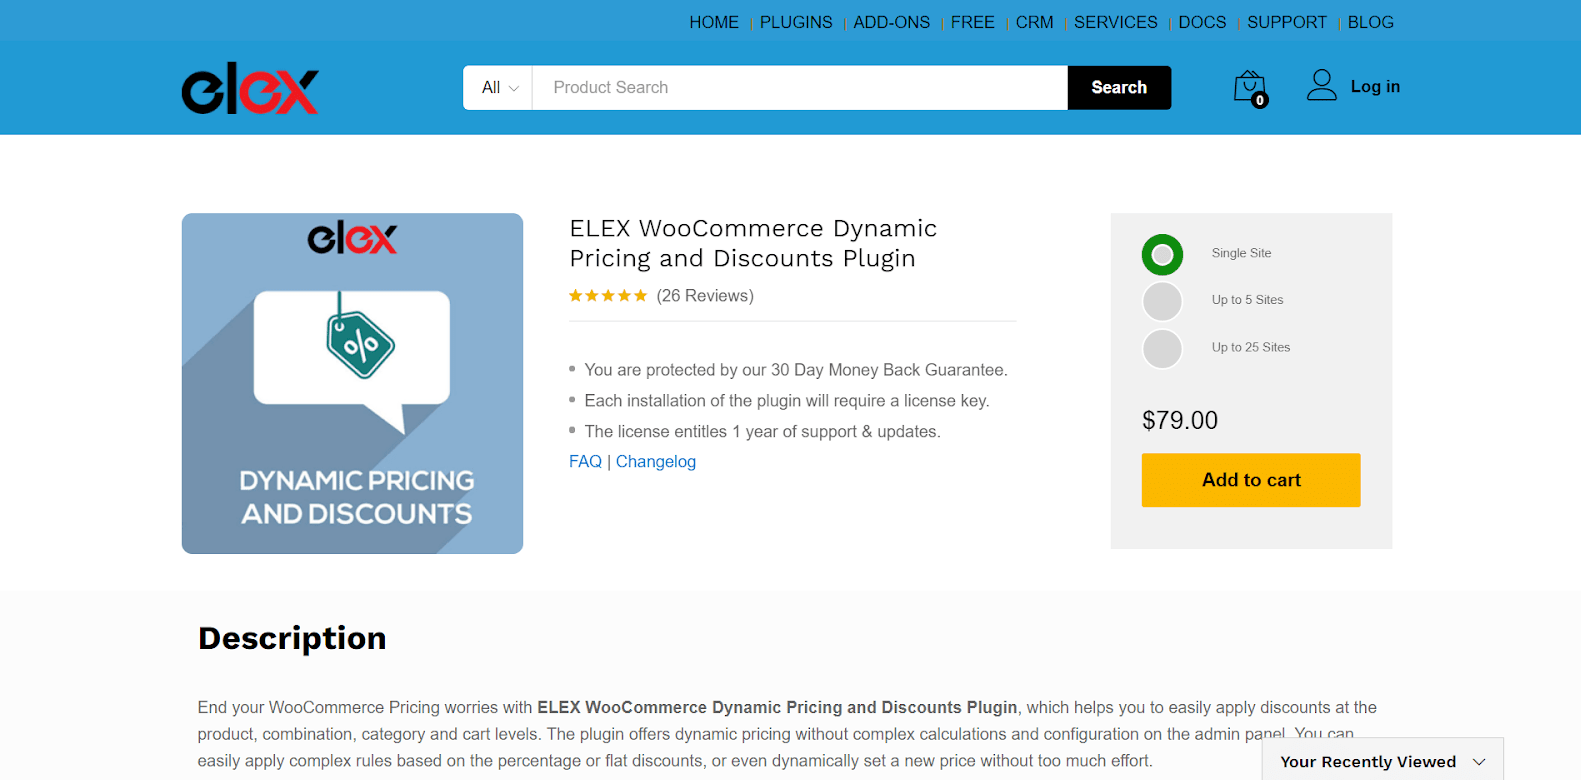 ELEX WooCommerce Dynamic Pricing and Discounts